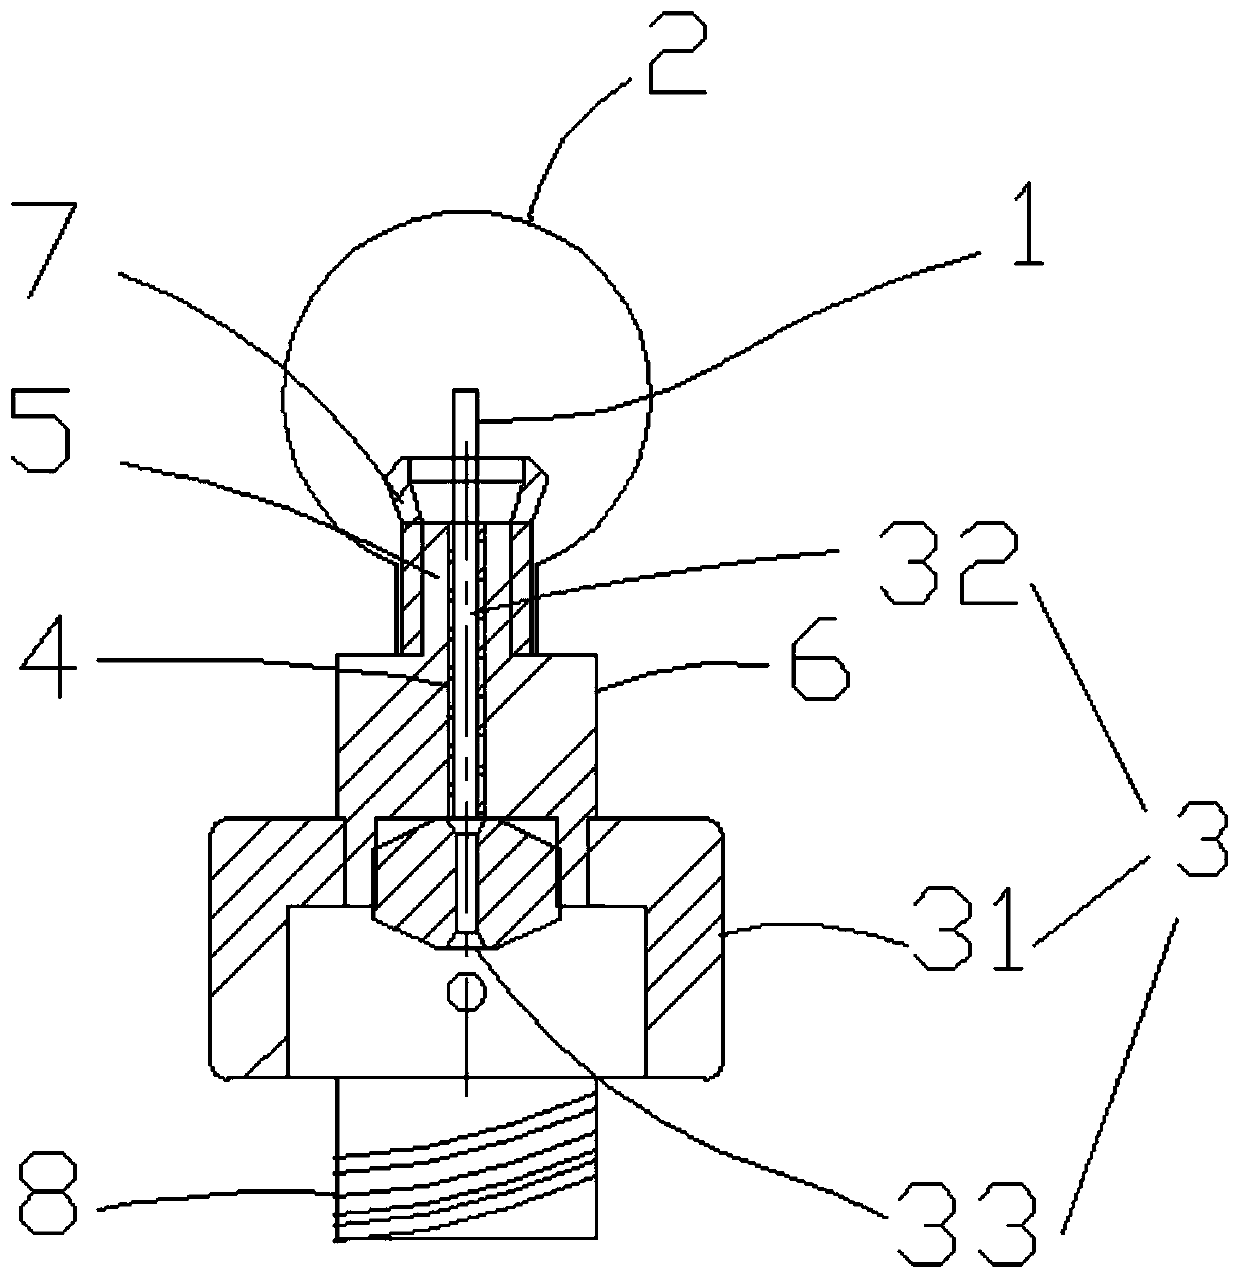 System and method for quickly judging mutual influence of filament and lampshade performances